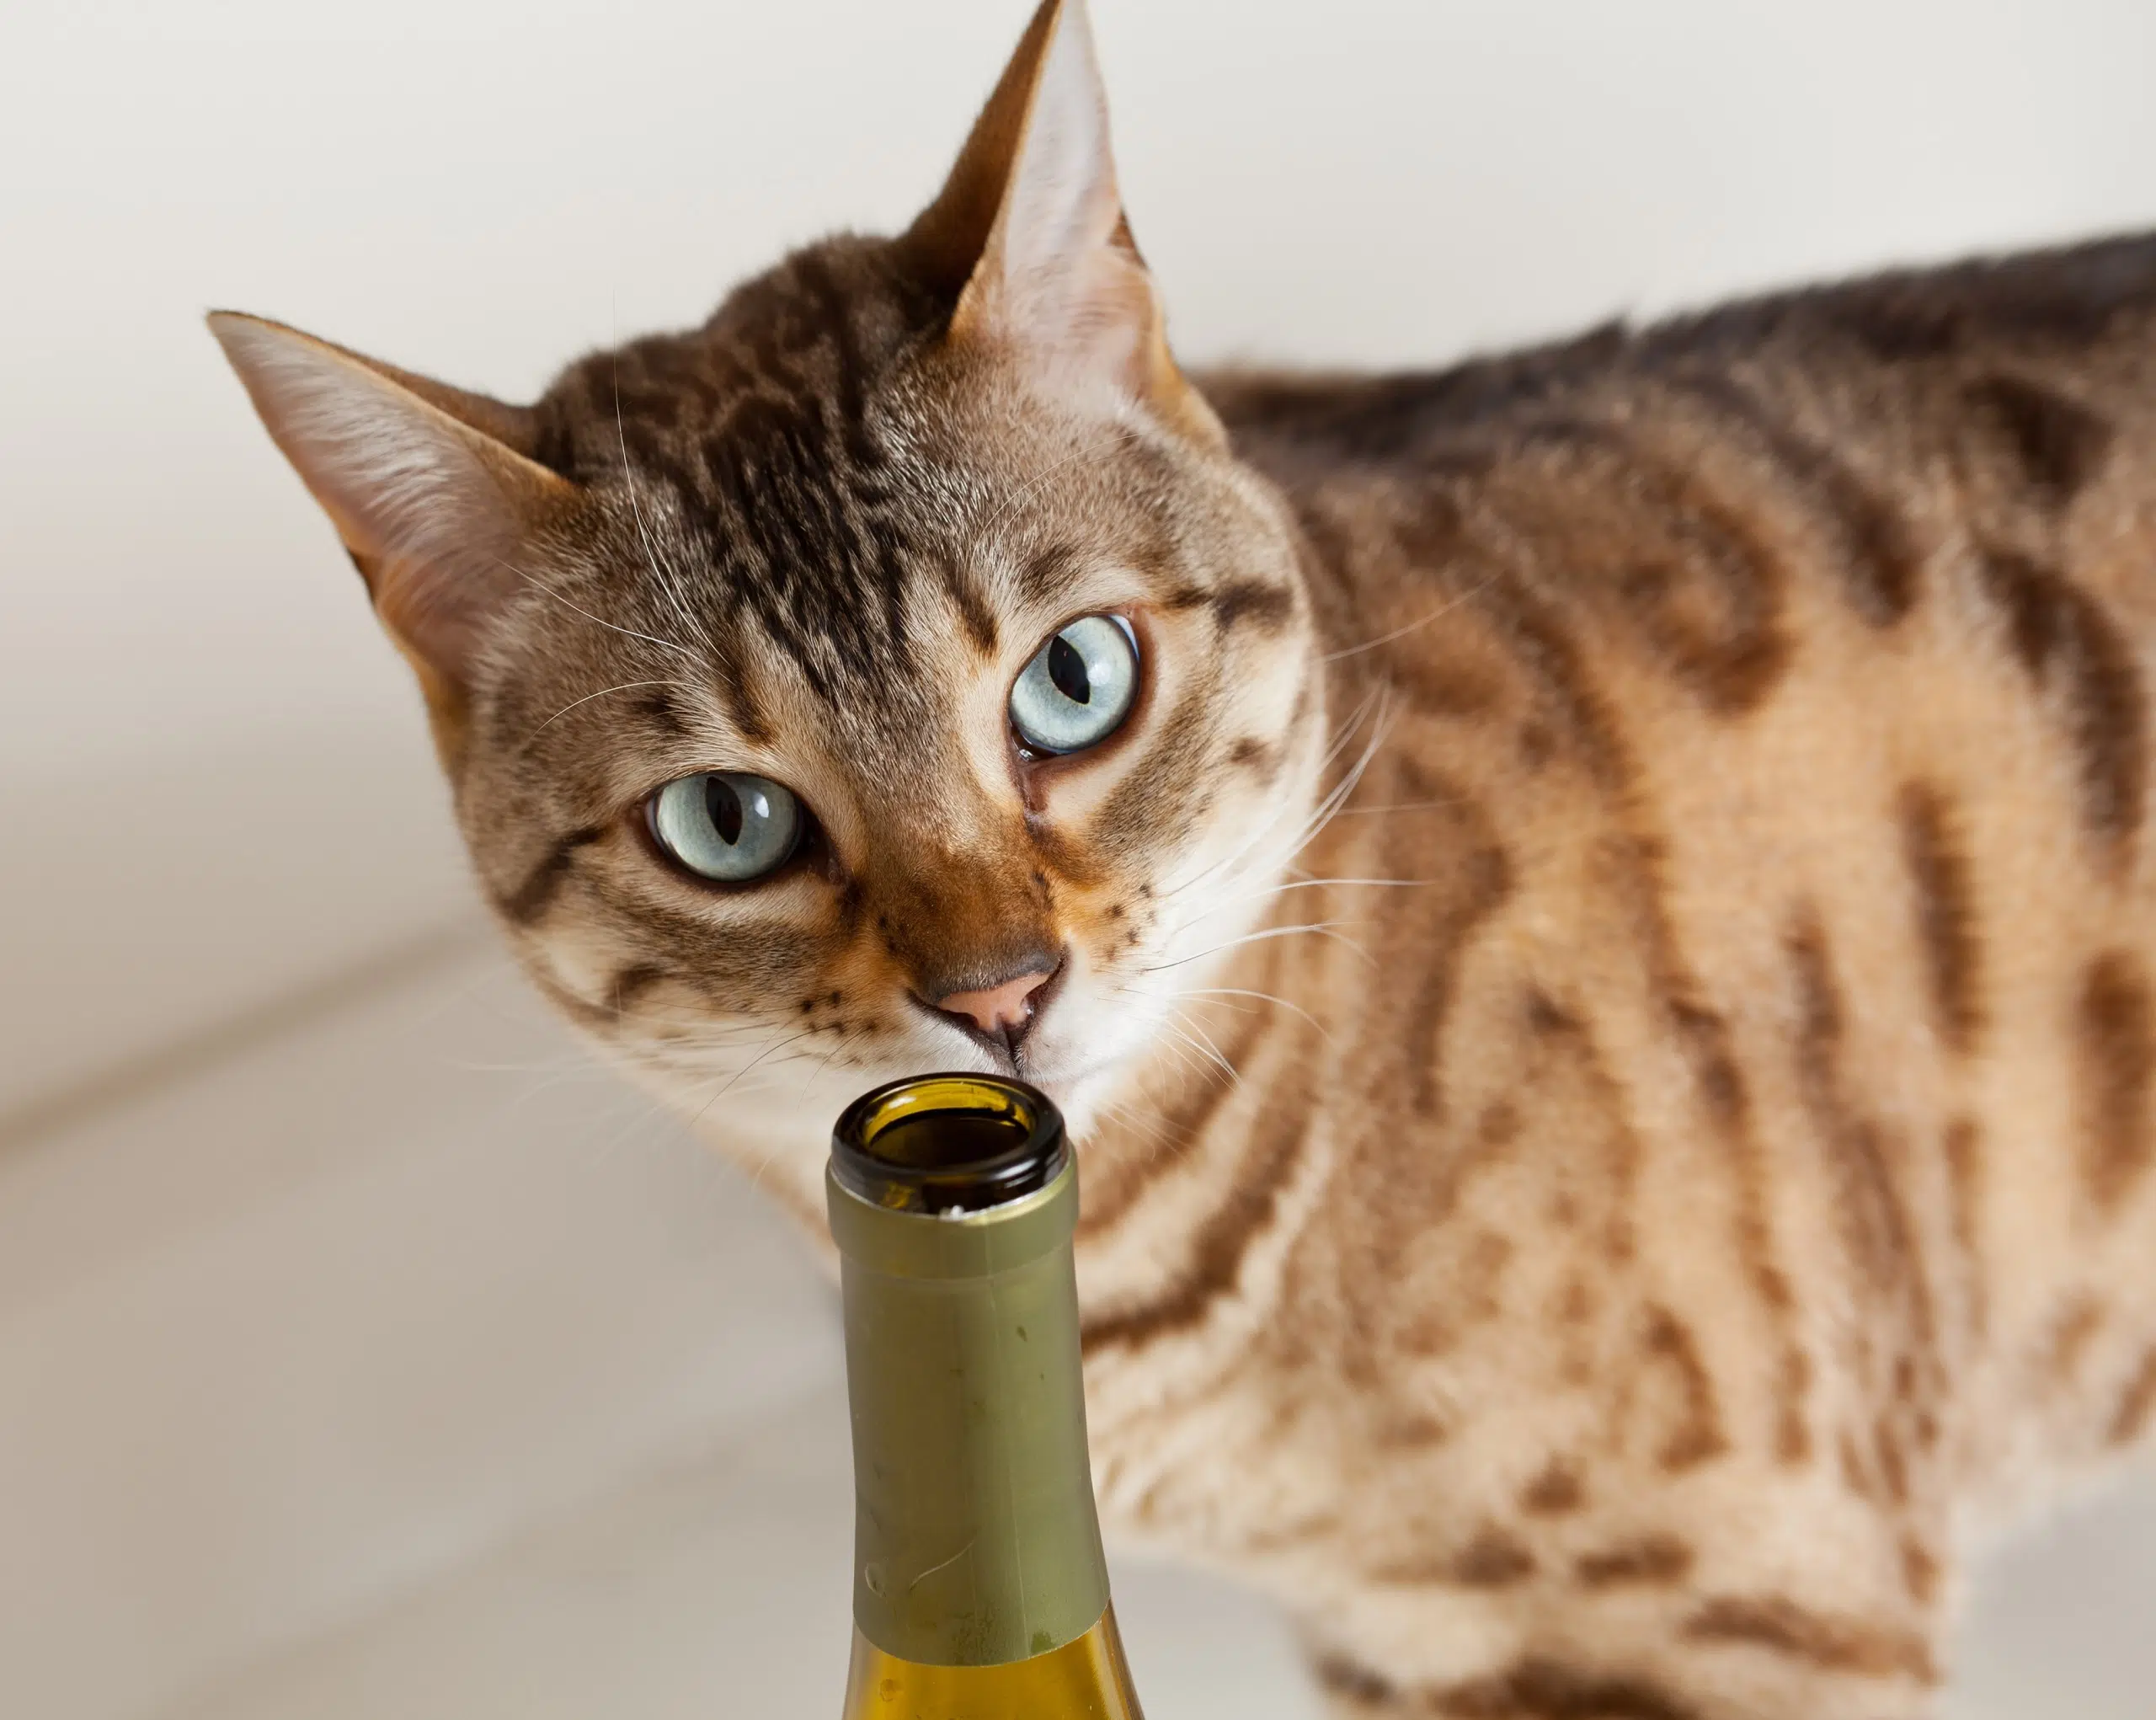 Colorado Company is Making Wine for Cats